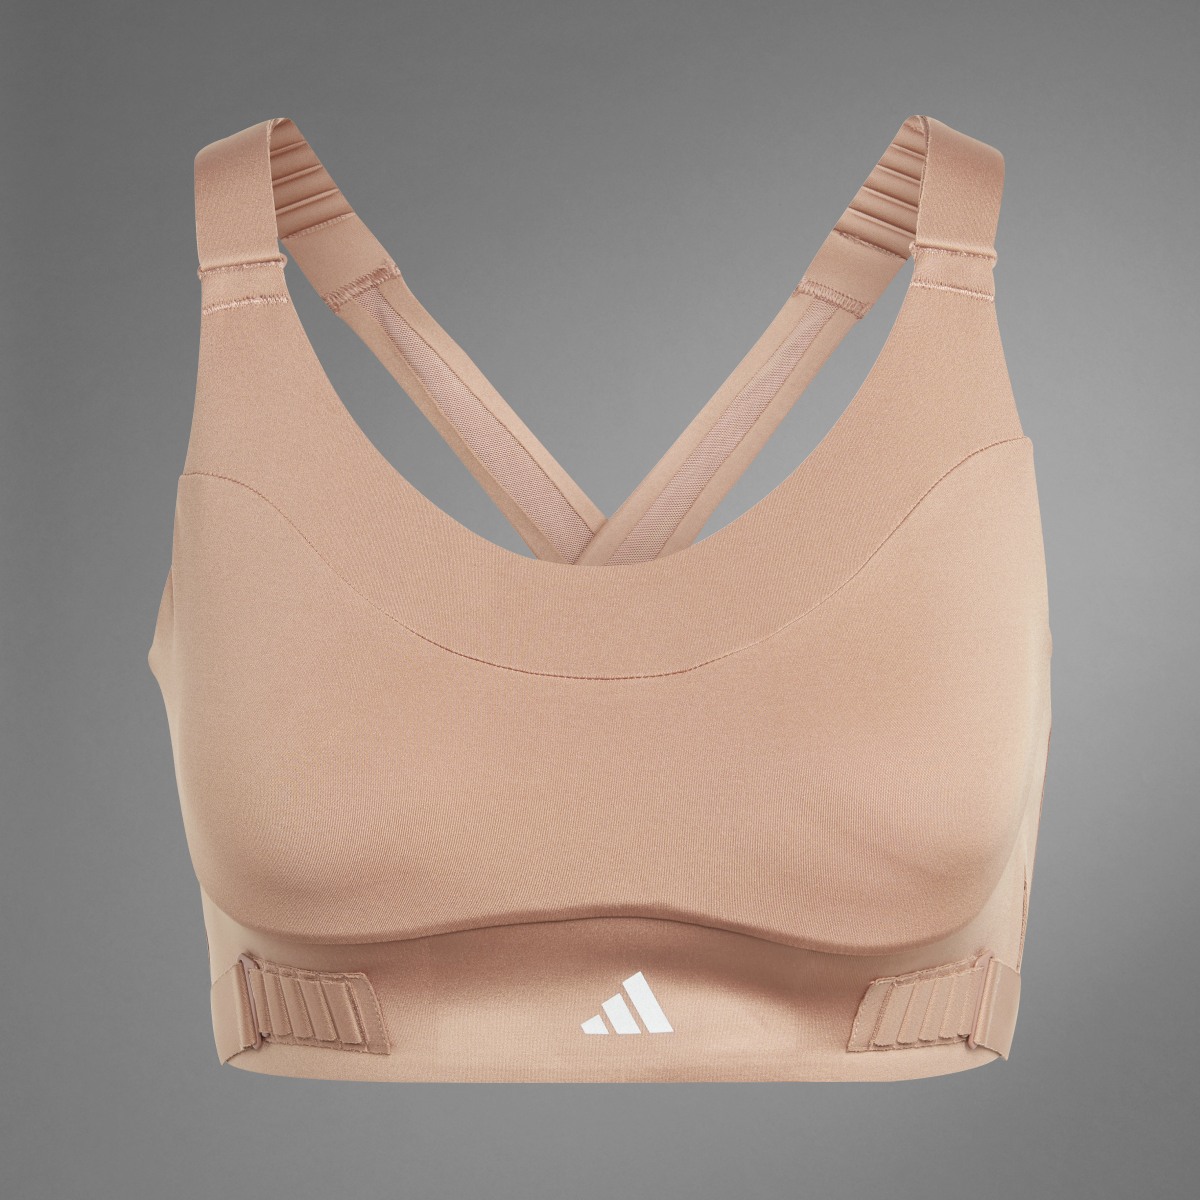 Adidas Brassière Collective Power Fastimpact Luxe Maintien fort. 10